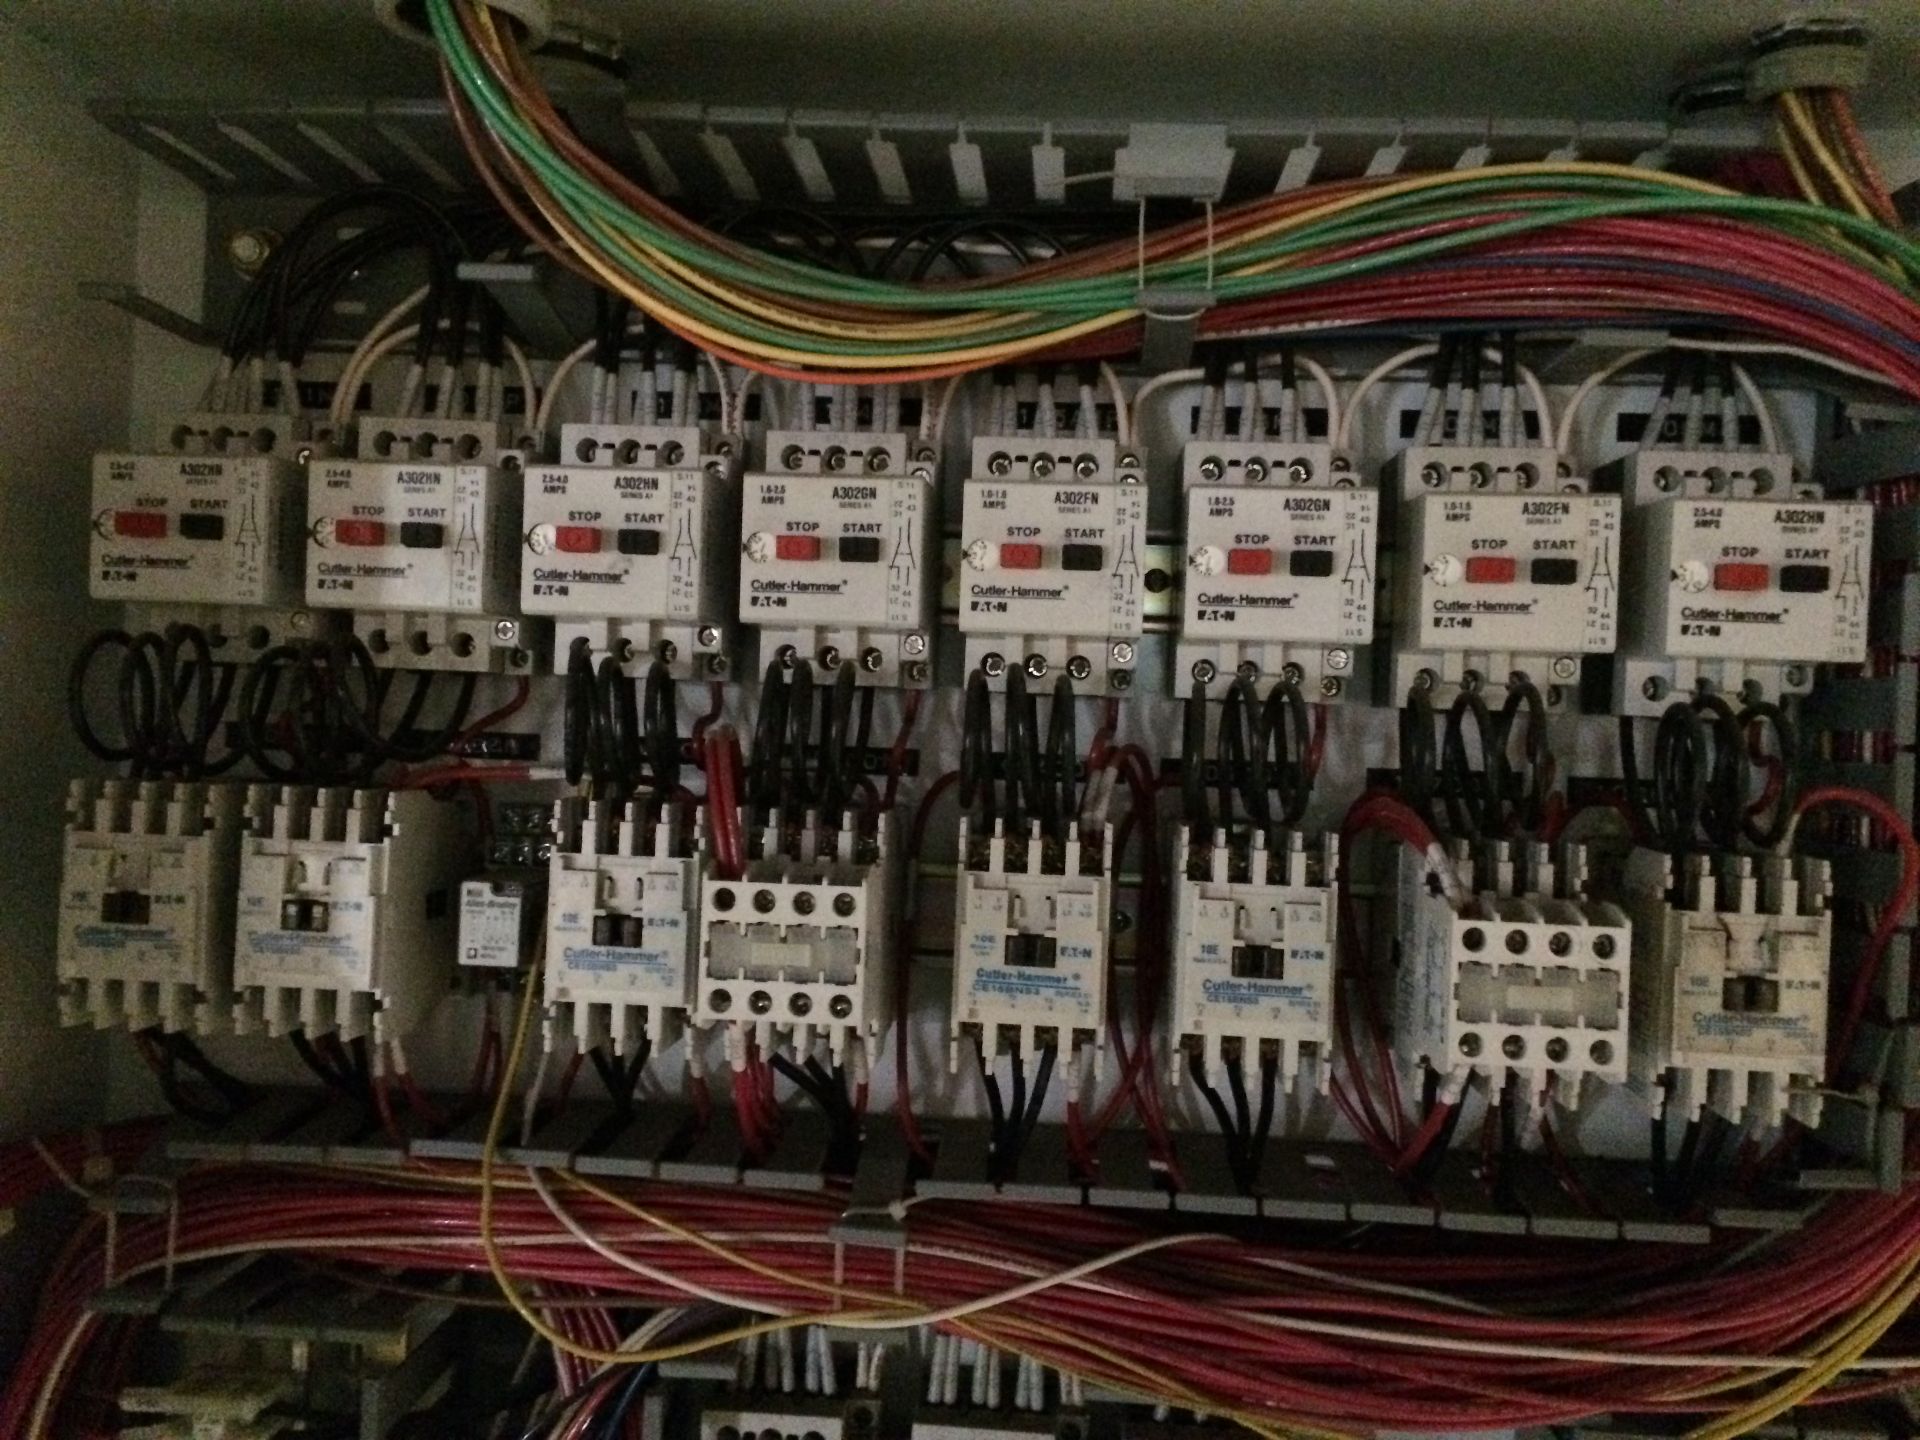 CONTROL PANEL WITH ALLEN BRADLEY WITH SLC 5/02 CPU, INPUT AND OUTPUT UNIT AND CONTROLS - Image 7 of 17